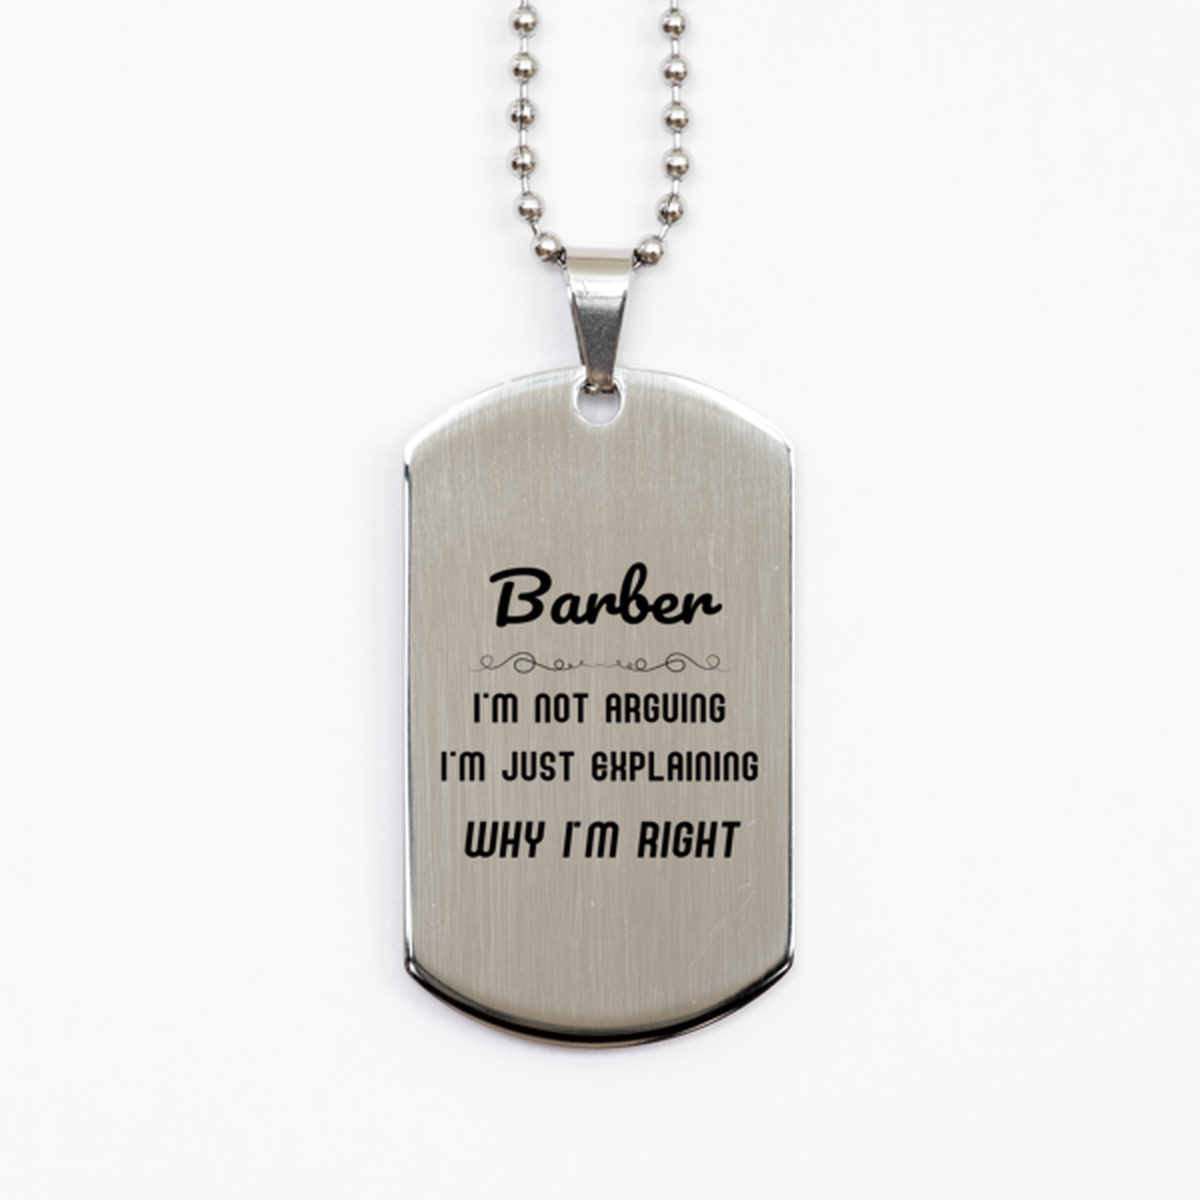 Barber I'm not Arguing. I'm Just Explaining Why I'm RIGHT Silver Dog Tag, Funny Saying Quote Barber Gifts For Barber Graduation Birthday Christmas Gifts for Men Women Coworker